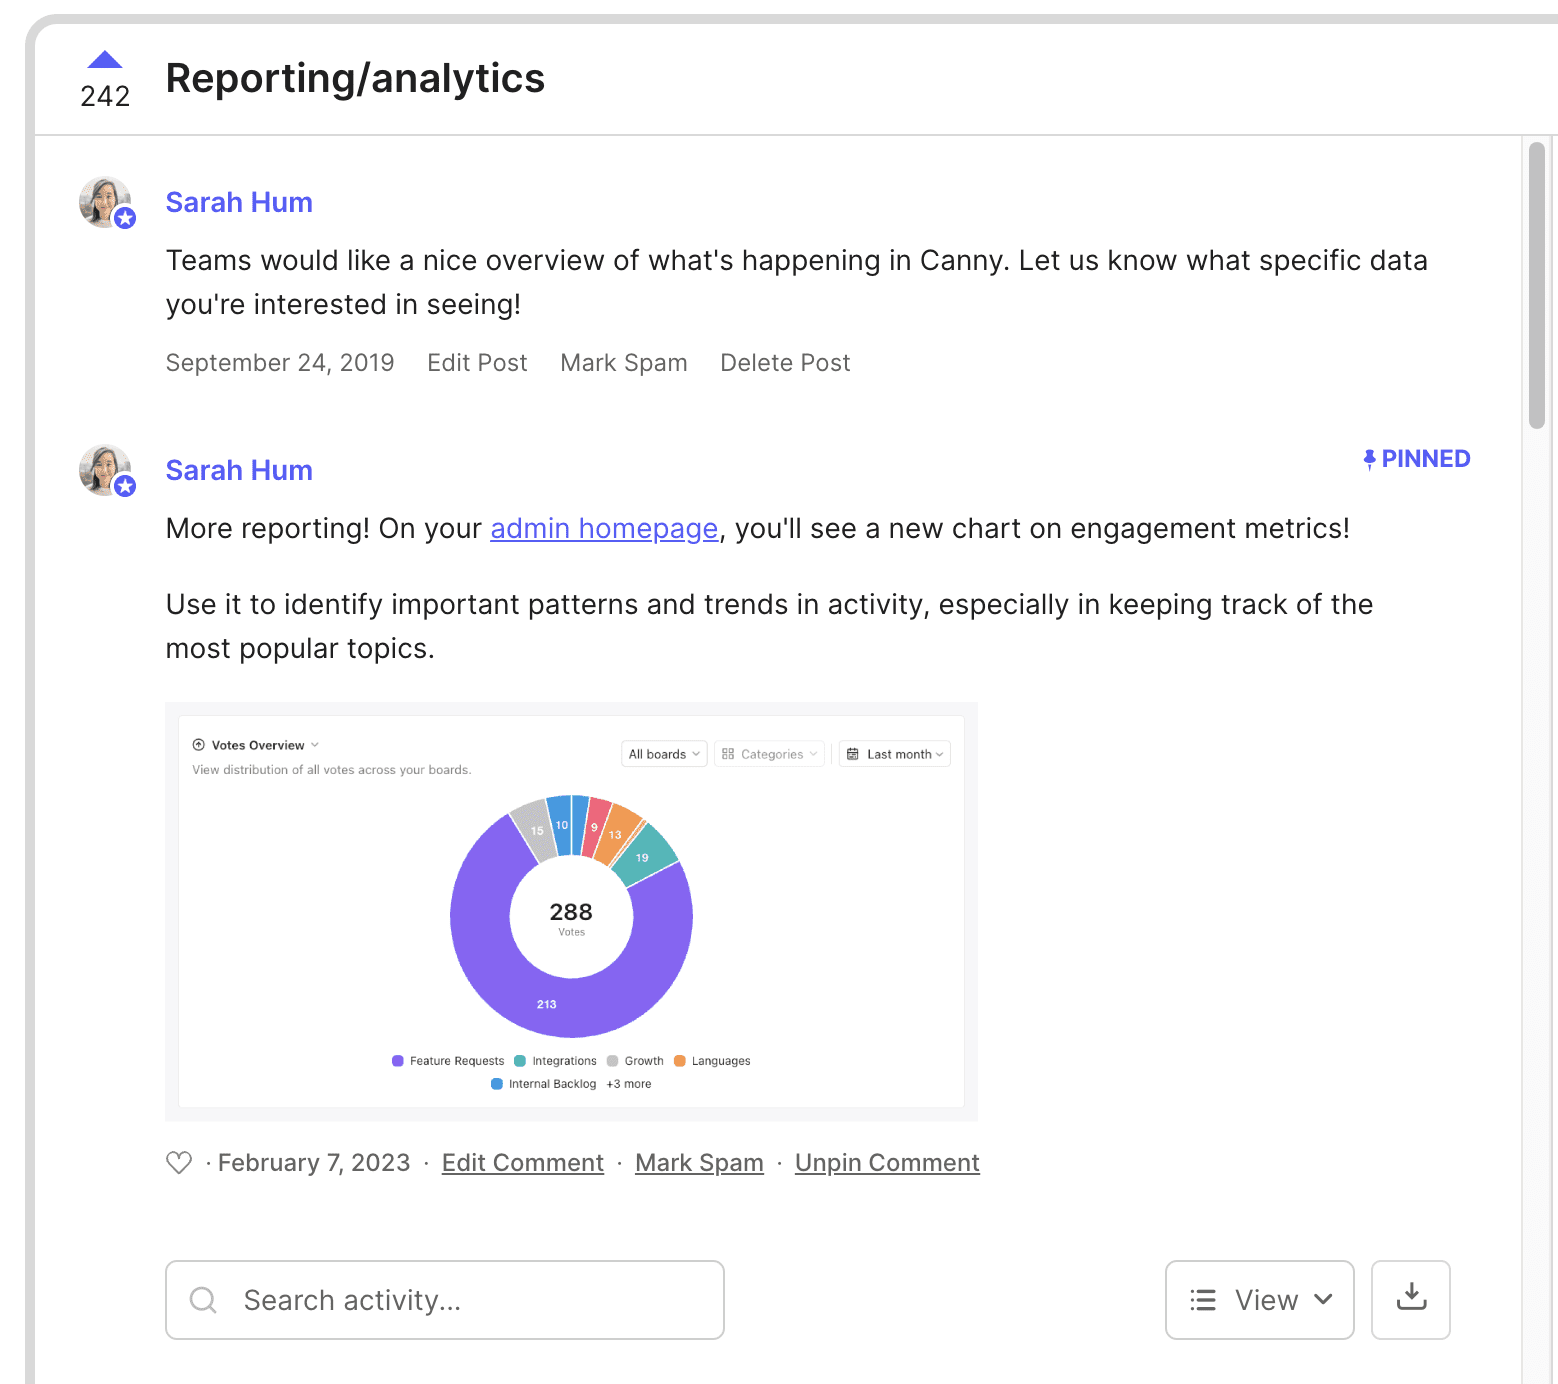 Canny's analytics feature request